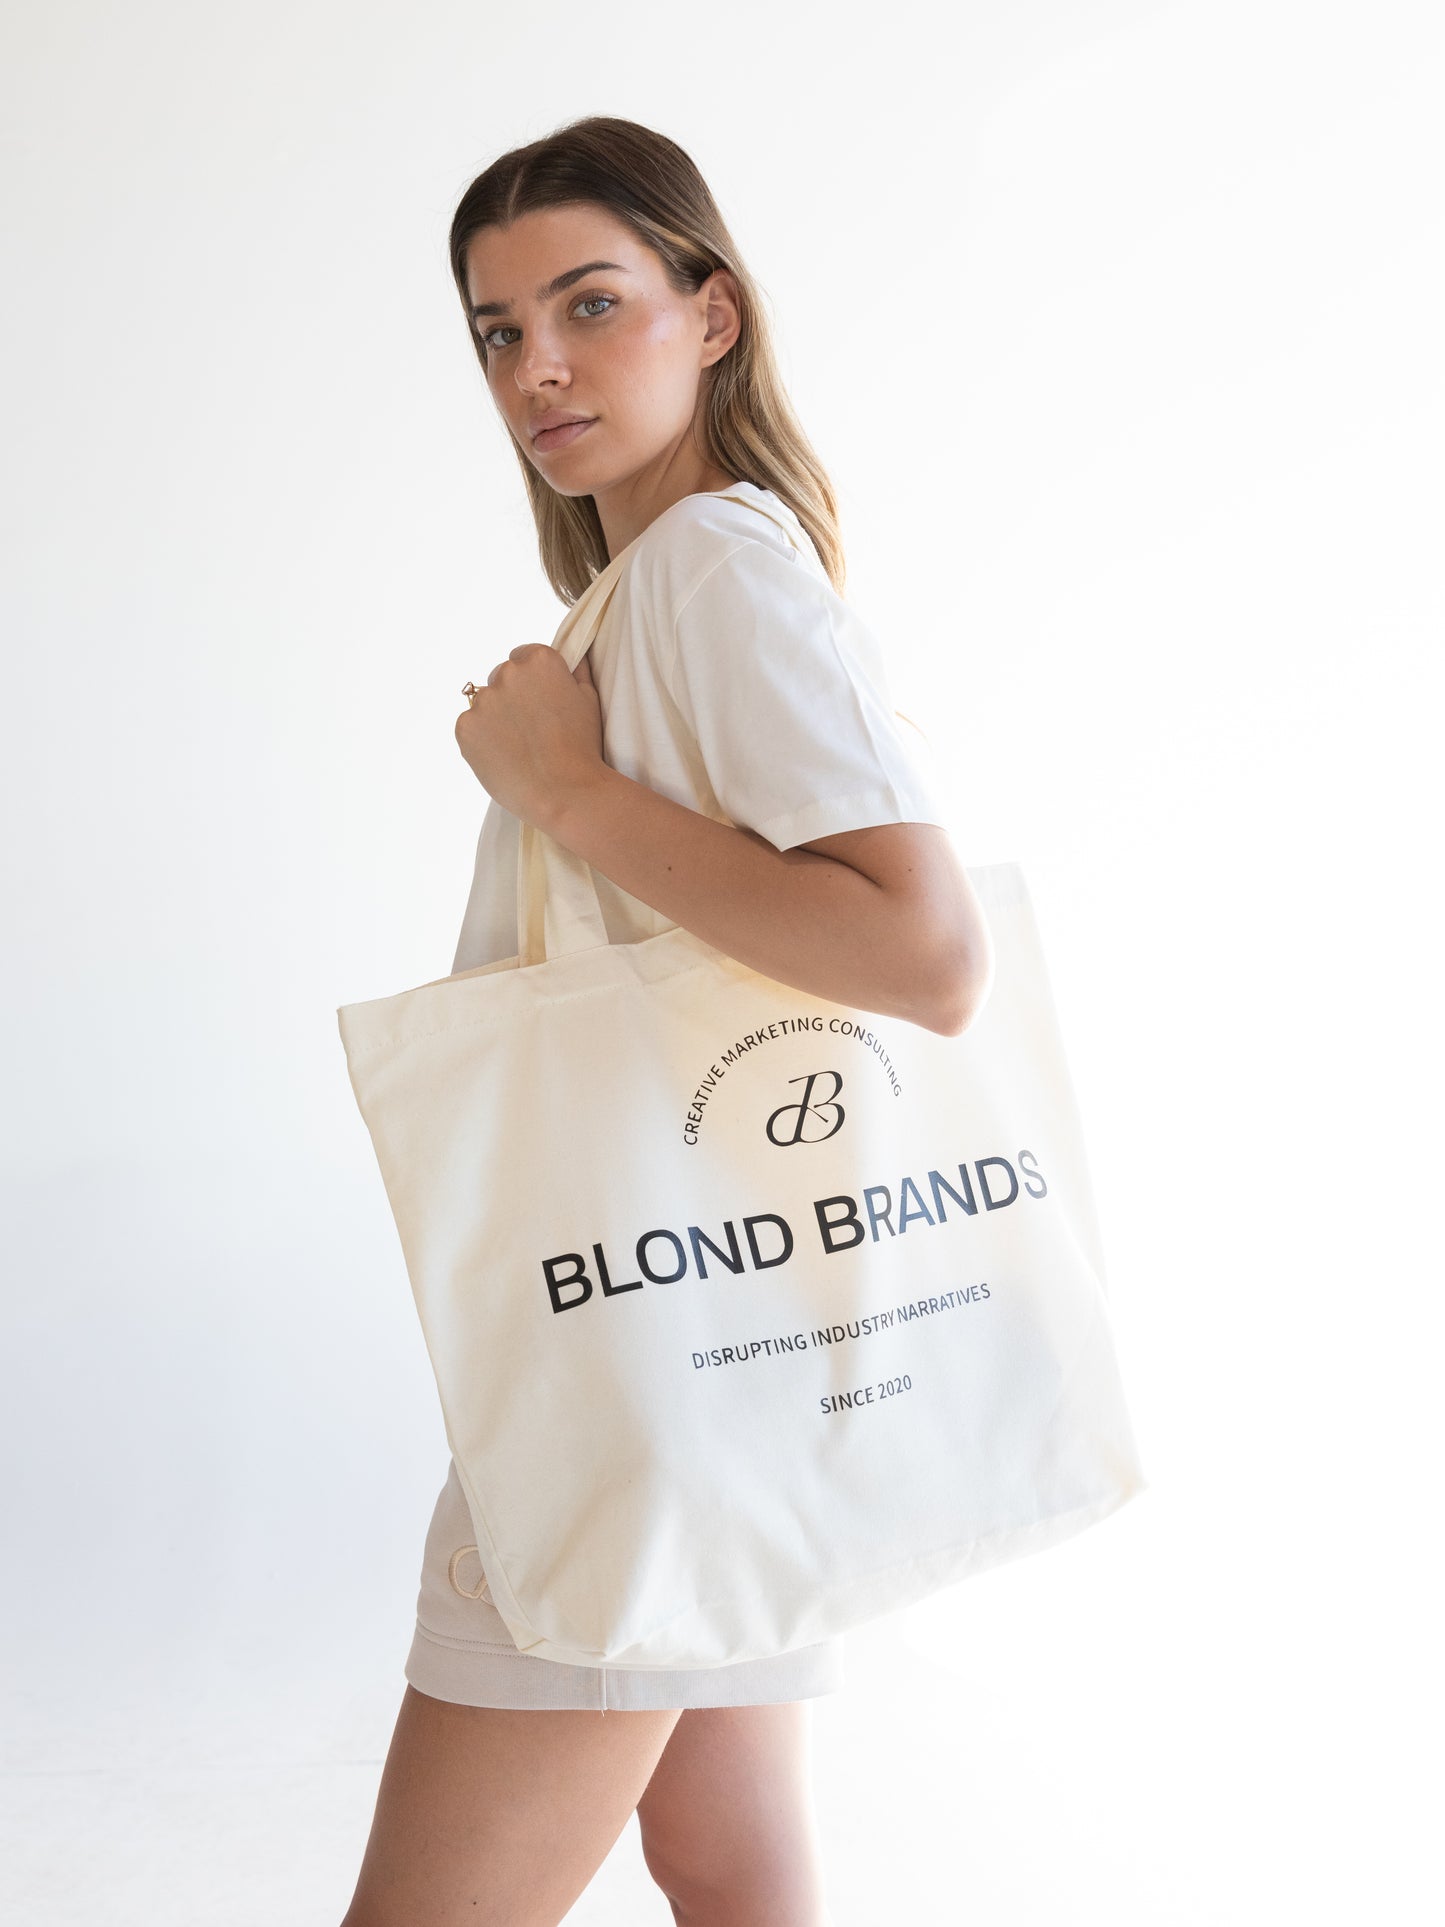 The Blond Brands Tote